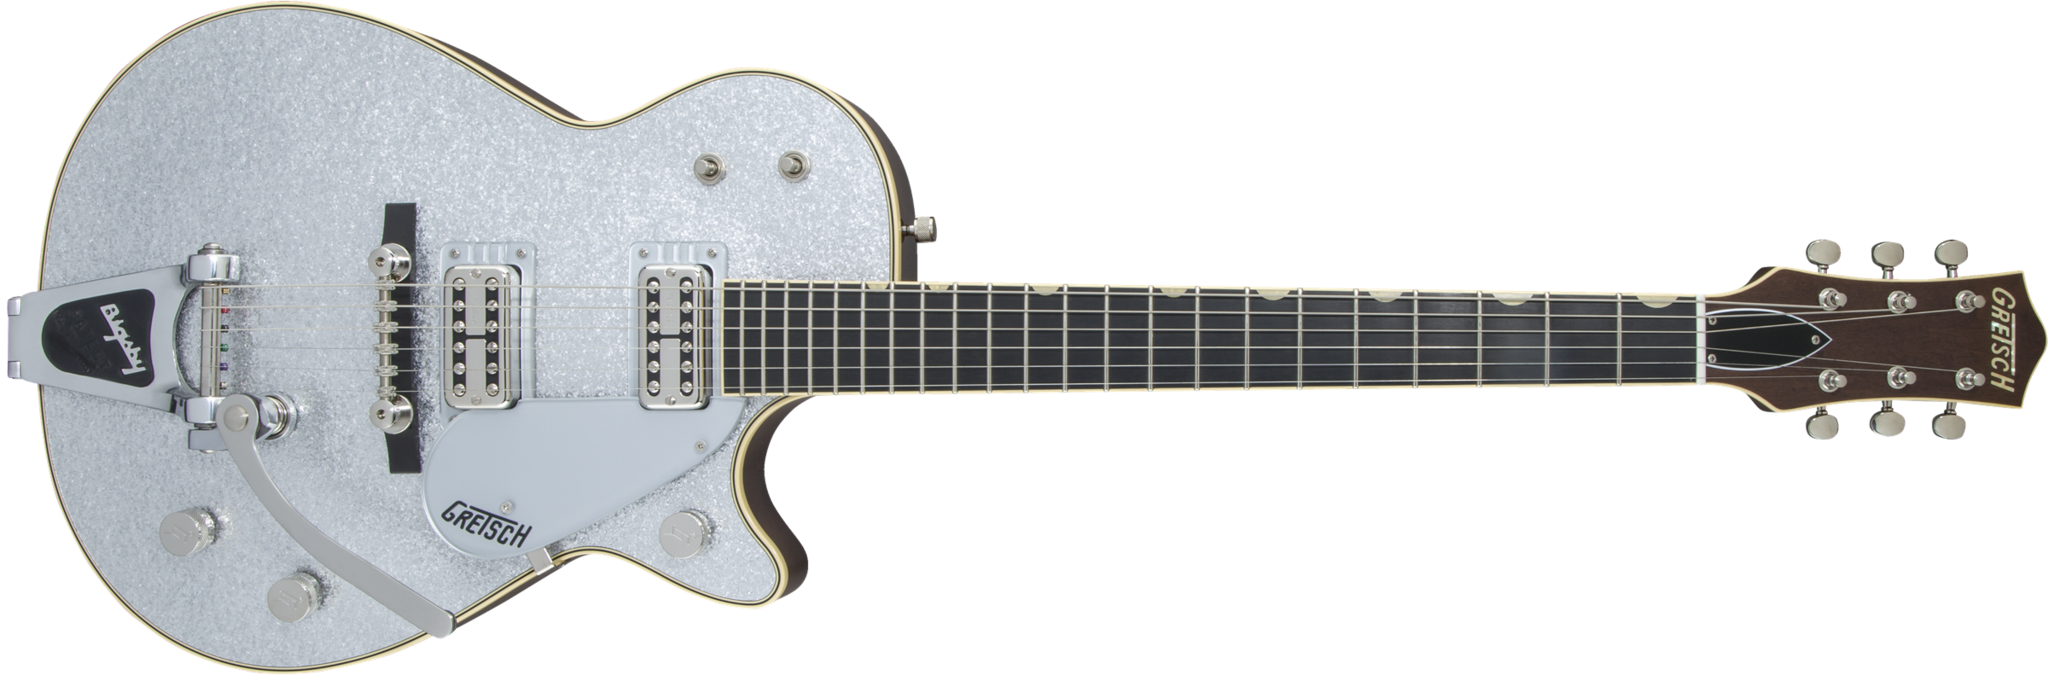 Gretsch G6129T-59 Vintage Select Silver Jet with Case - L.A. Music - Canada's Favourite Music Store!